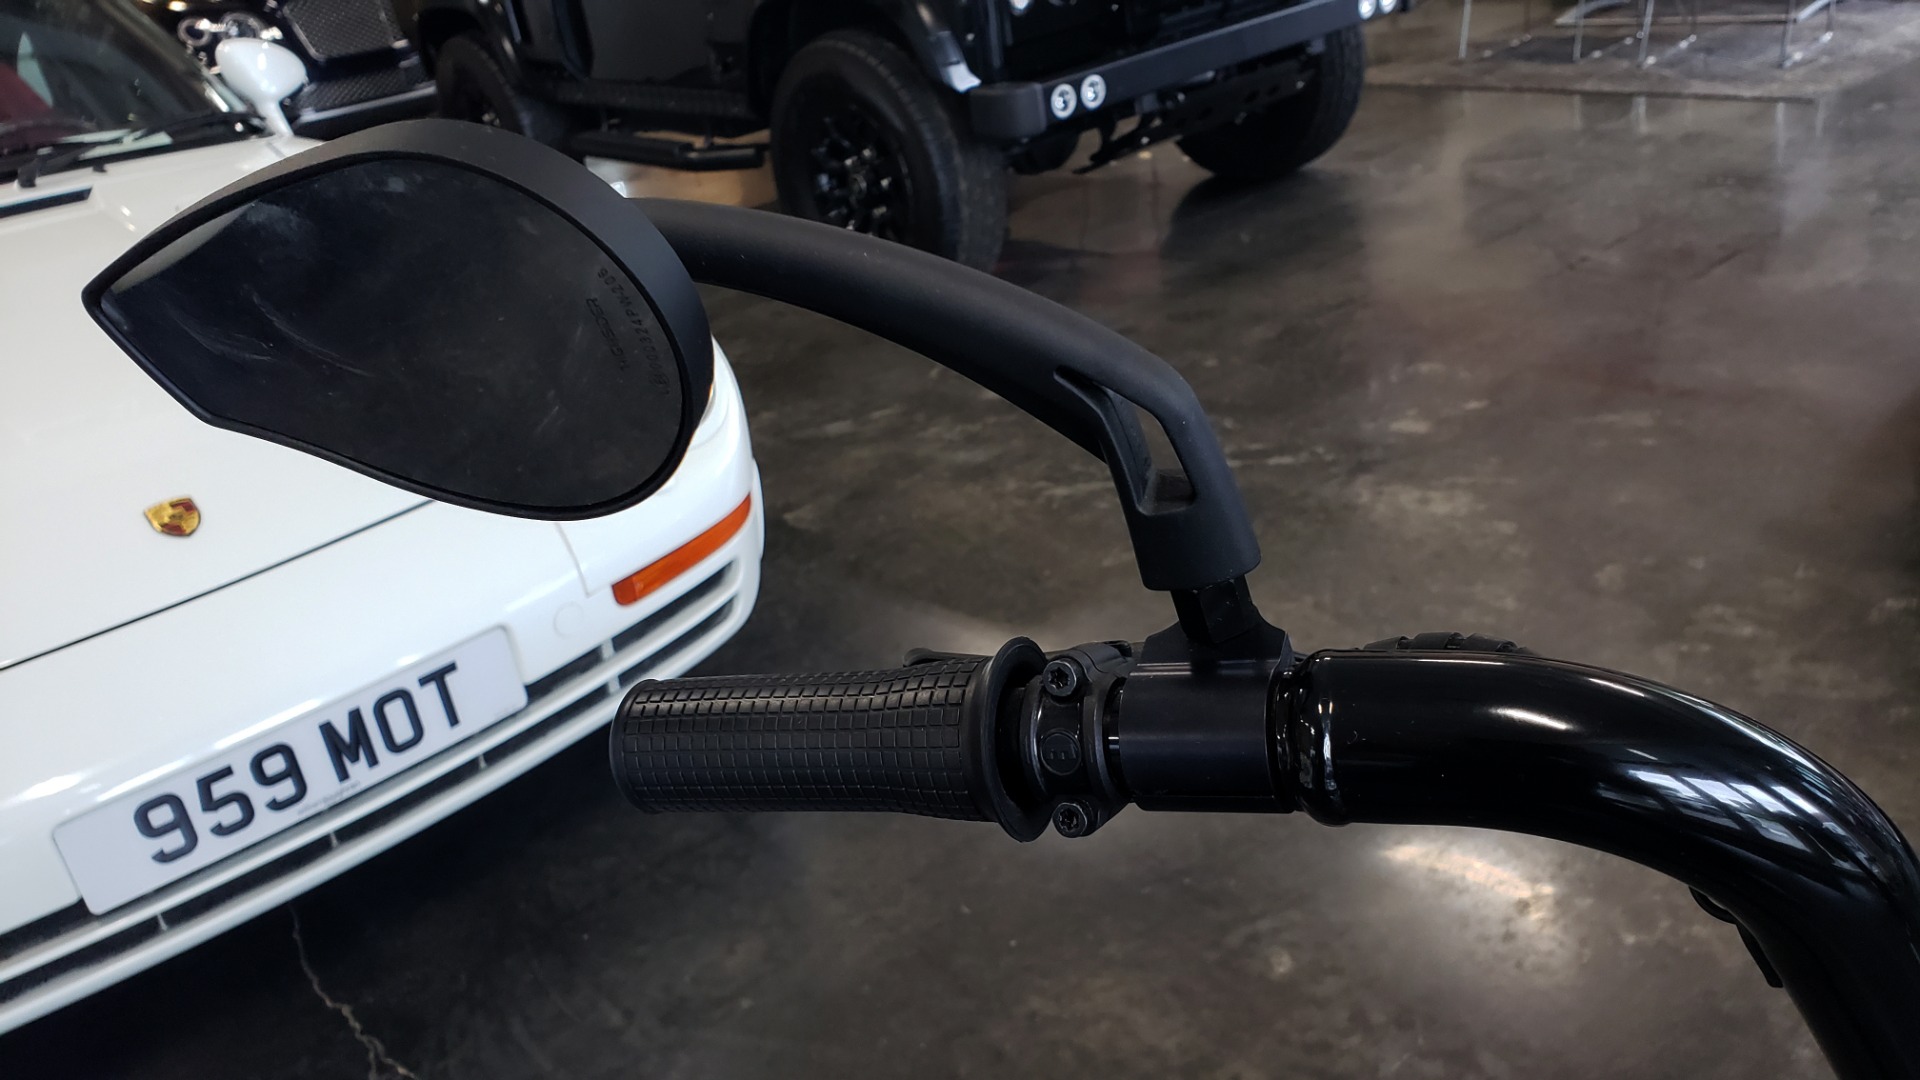 Used 2018 SCROOSER ELECTRIC SCOOTER SELF BALANCED / PRIME BLUE / 15.5 MPH / 34 MI RANGE for sale Sold at Formula Imports in Charlotte NC 28227 11